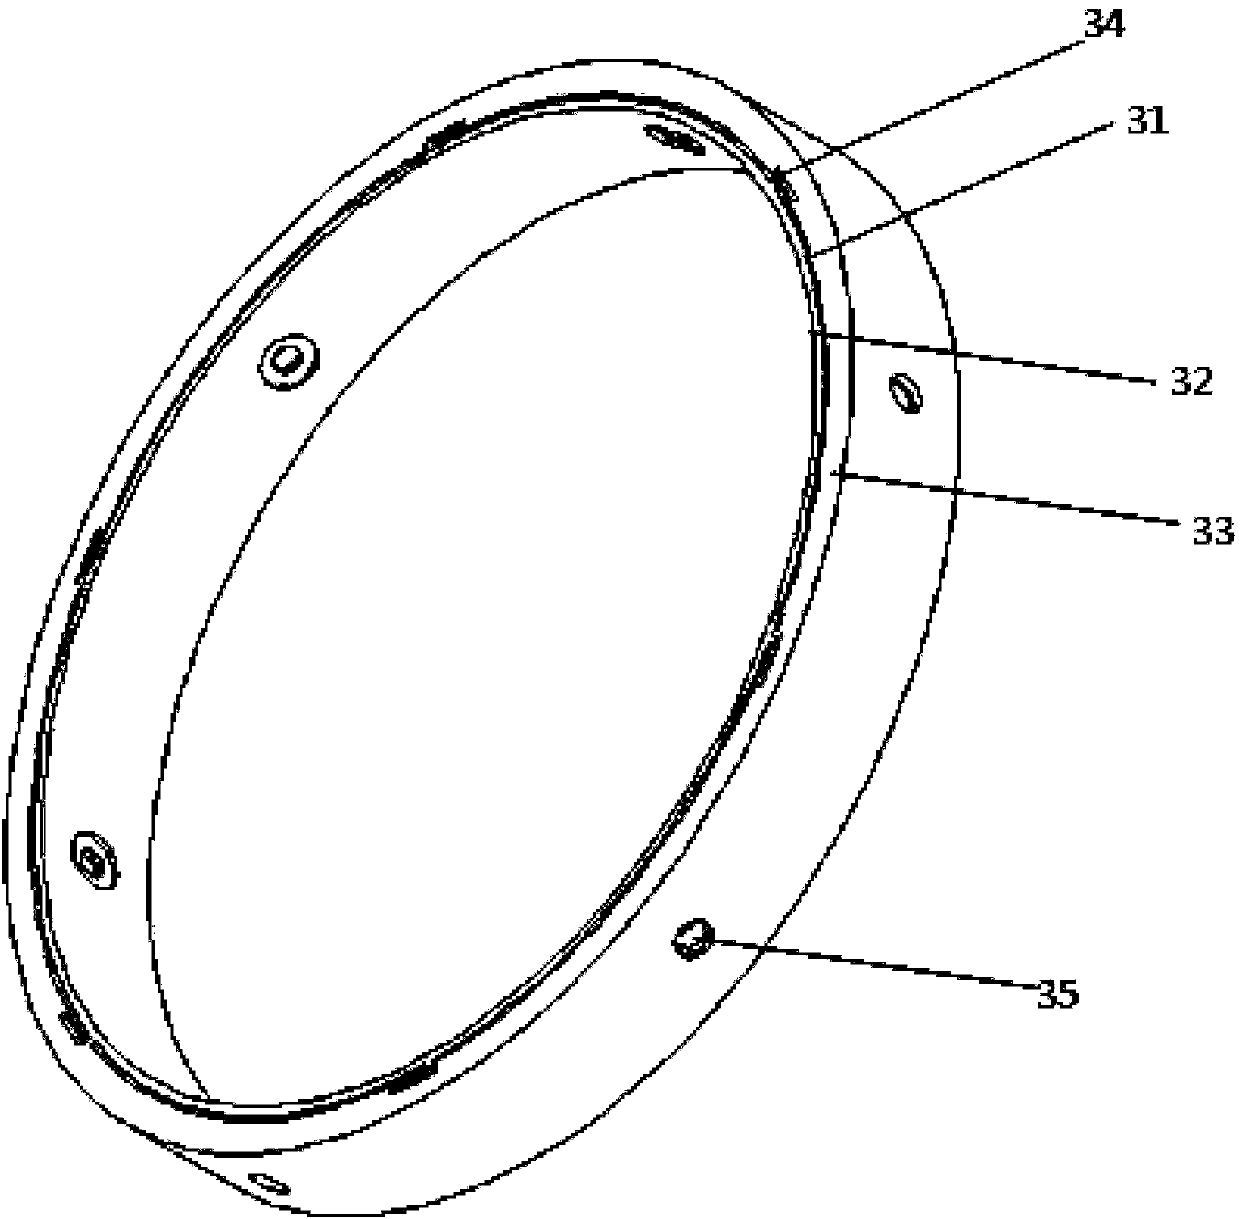 Stress-free clamping flexible device for high-precision standard lenses